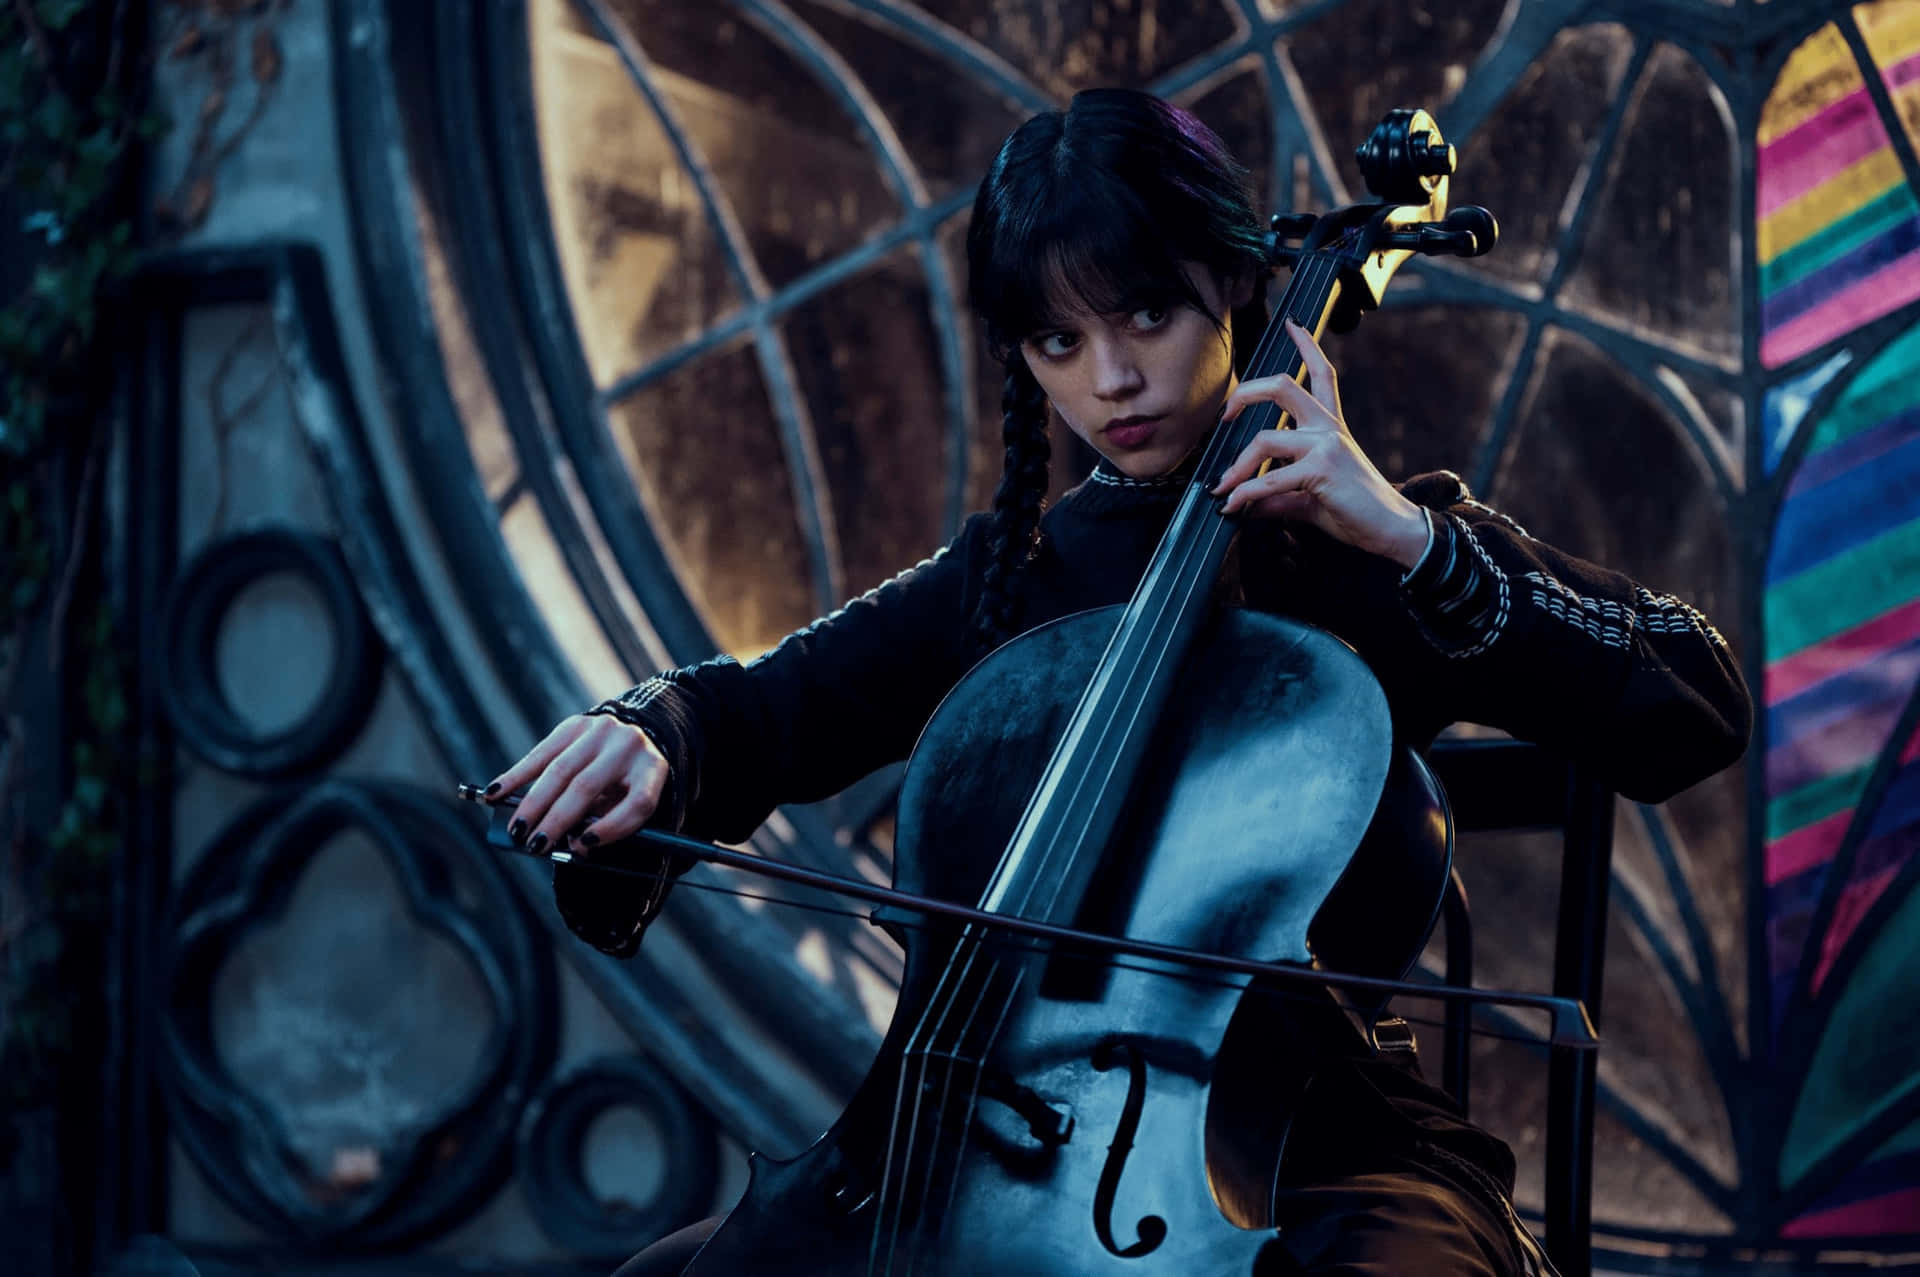 Wednesday Addams Playing Cello Wallpaper